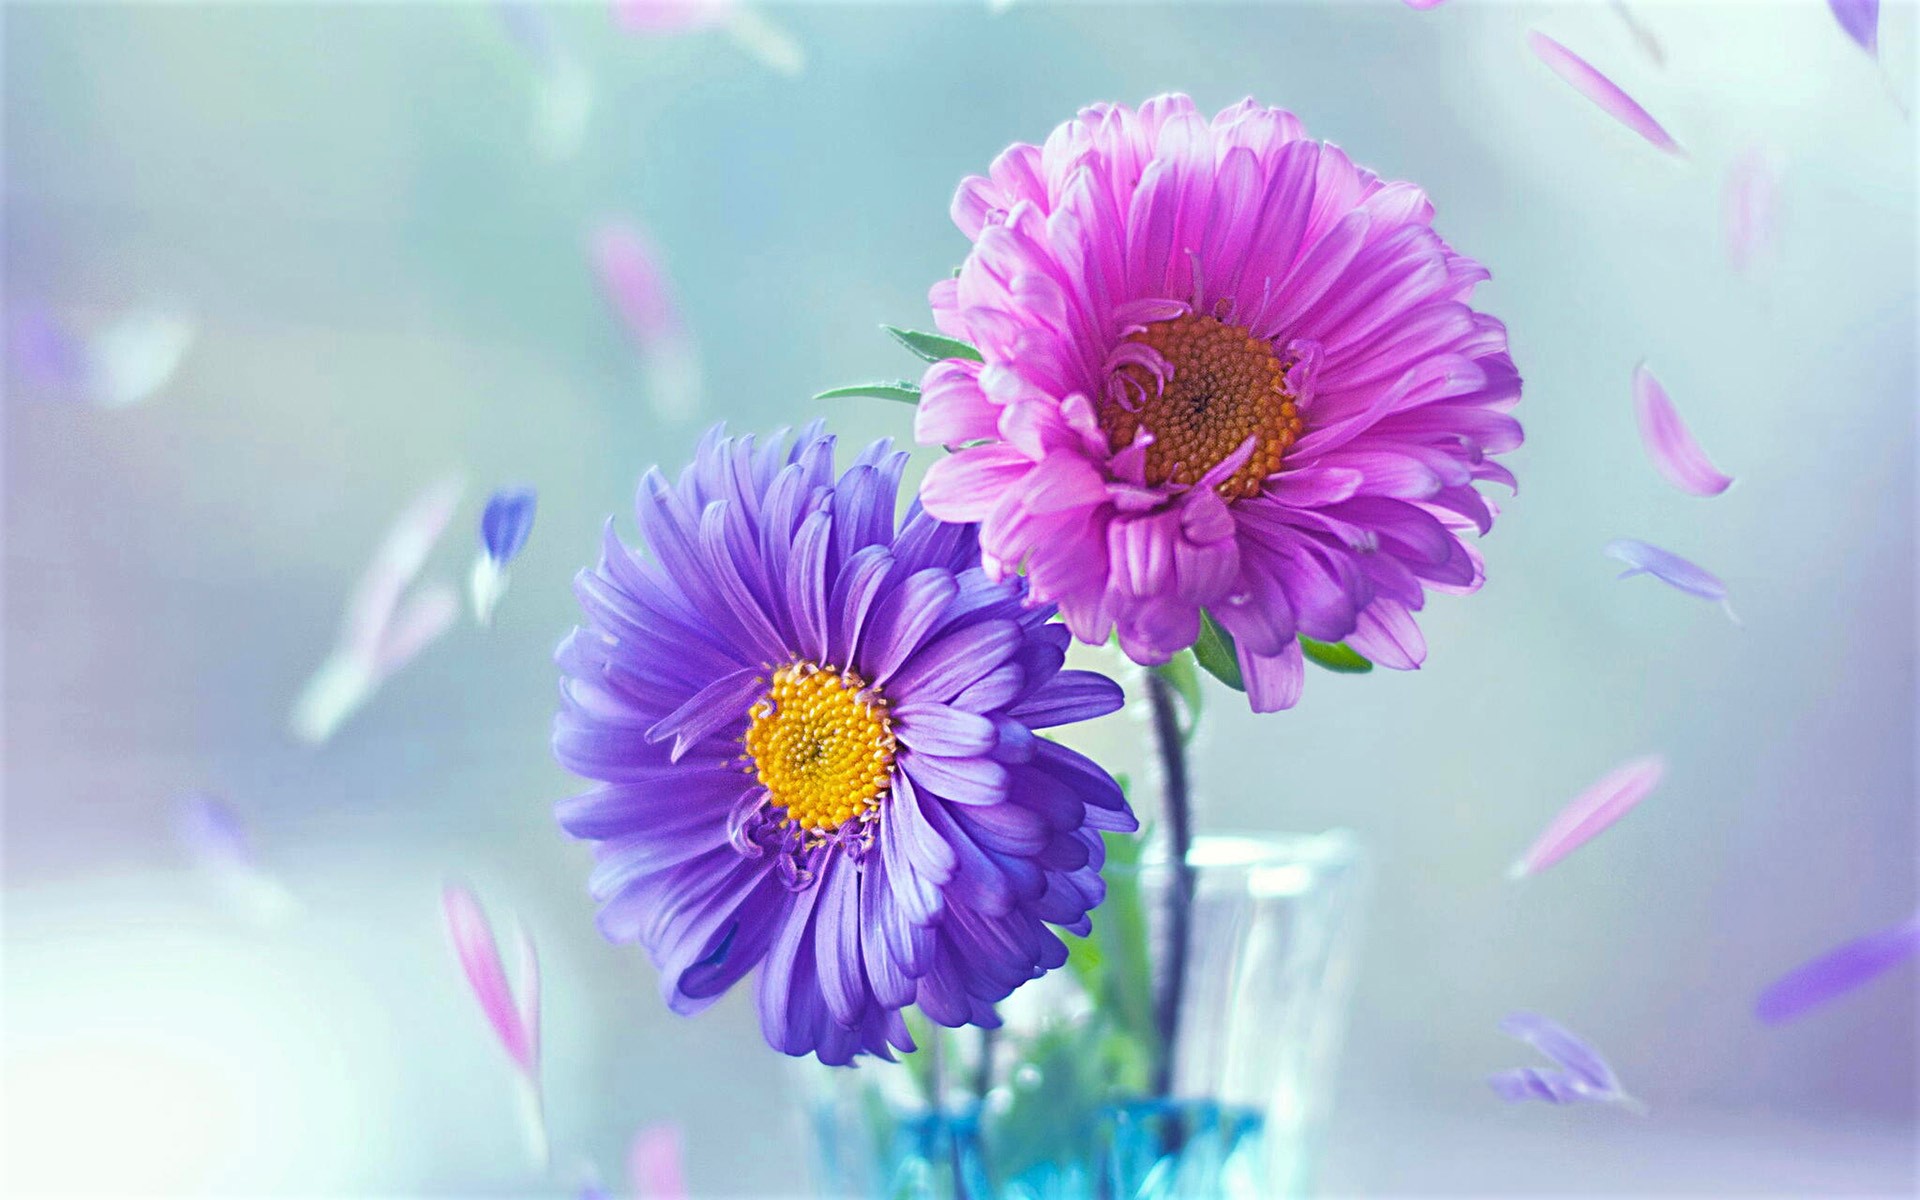 Pink and Purple by Ashraful Arefin